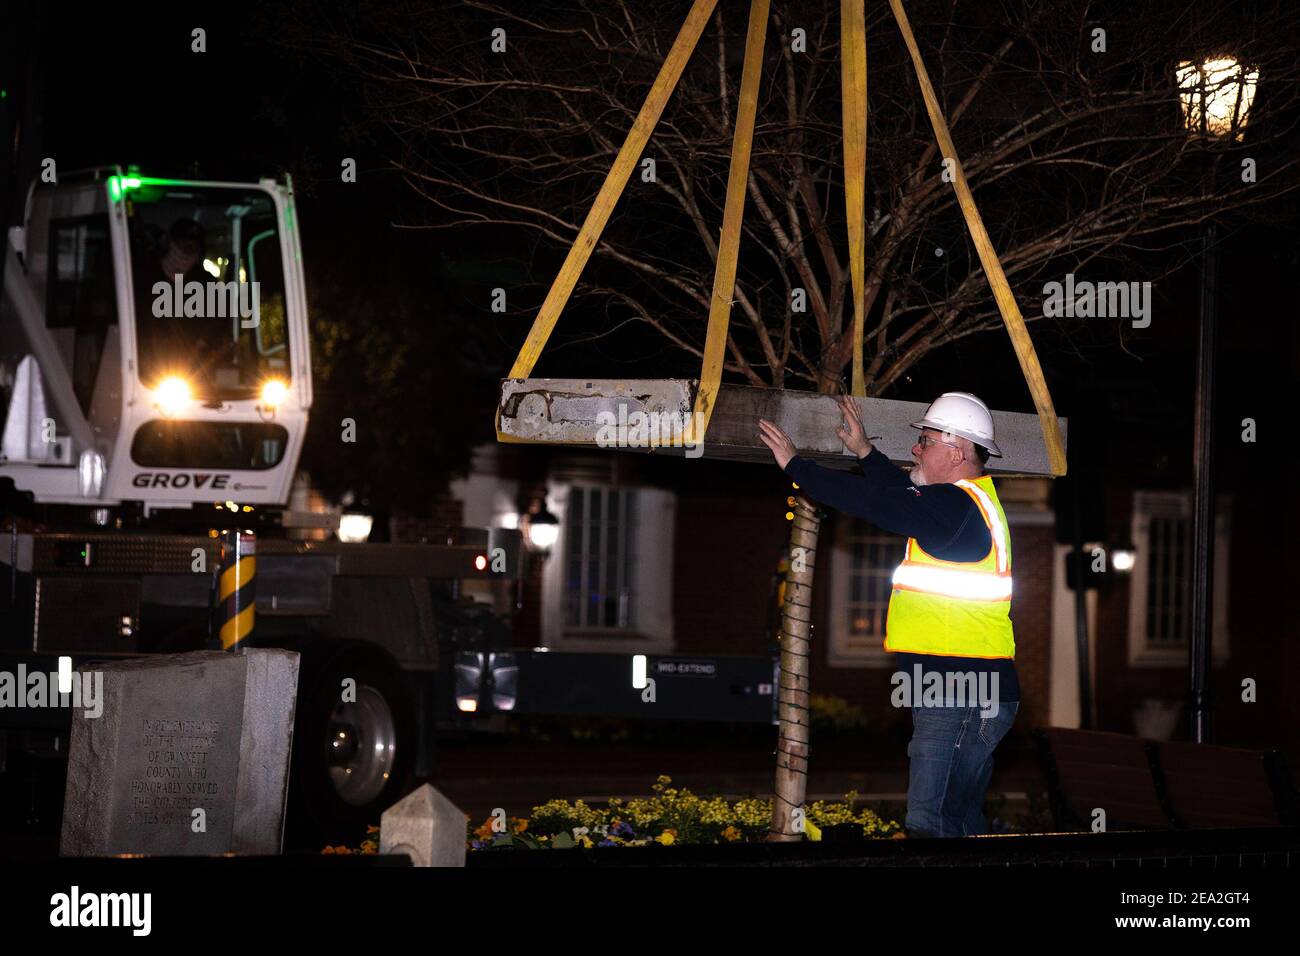 Mart Clamp, right, of Clamp Sandblast in Elberton, Georgia, works with a crew to remove a Confederate monument from its place on the grounds of the Gwinnett Historic Courthouse in Lawrenceville, Georgia, on February 4, 2021. The Gwinnett County Board of Commissioners voted unanimously on January 19 to remove the monument, overturning the decision of their predecessors from almost three decades prior. In 1993, county commissioners gave permission for the monument to be installed at the request of the United Daughters of the Confederacy. (Photo by Casey Sykes/Atlanta Journal-Constitution/TNS/Sip Stock Photo